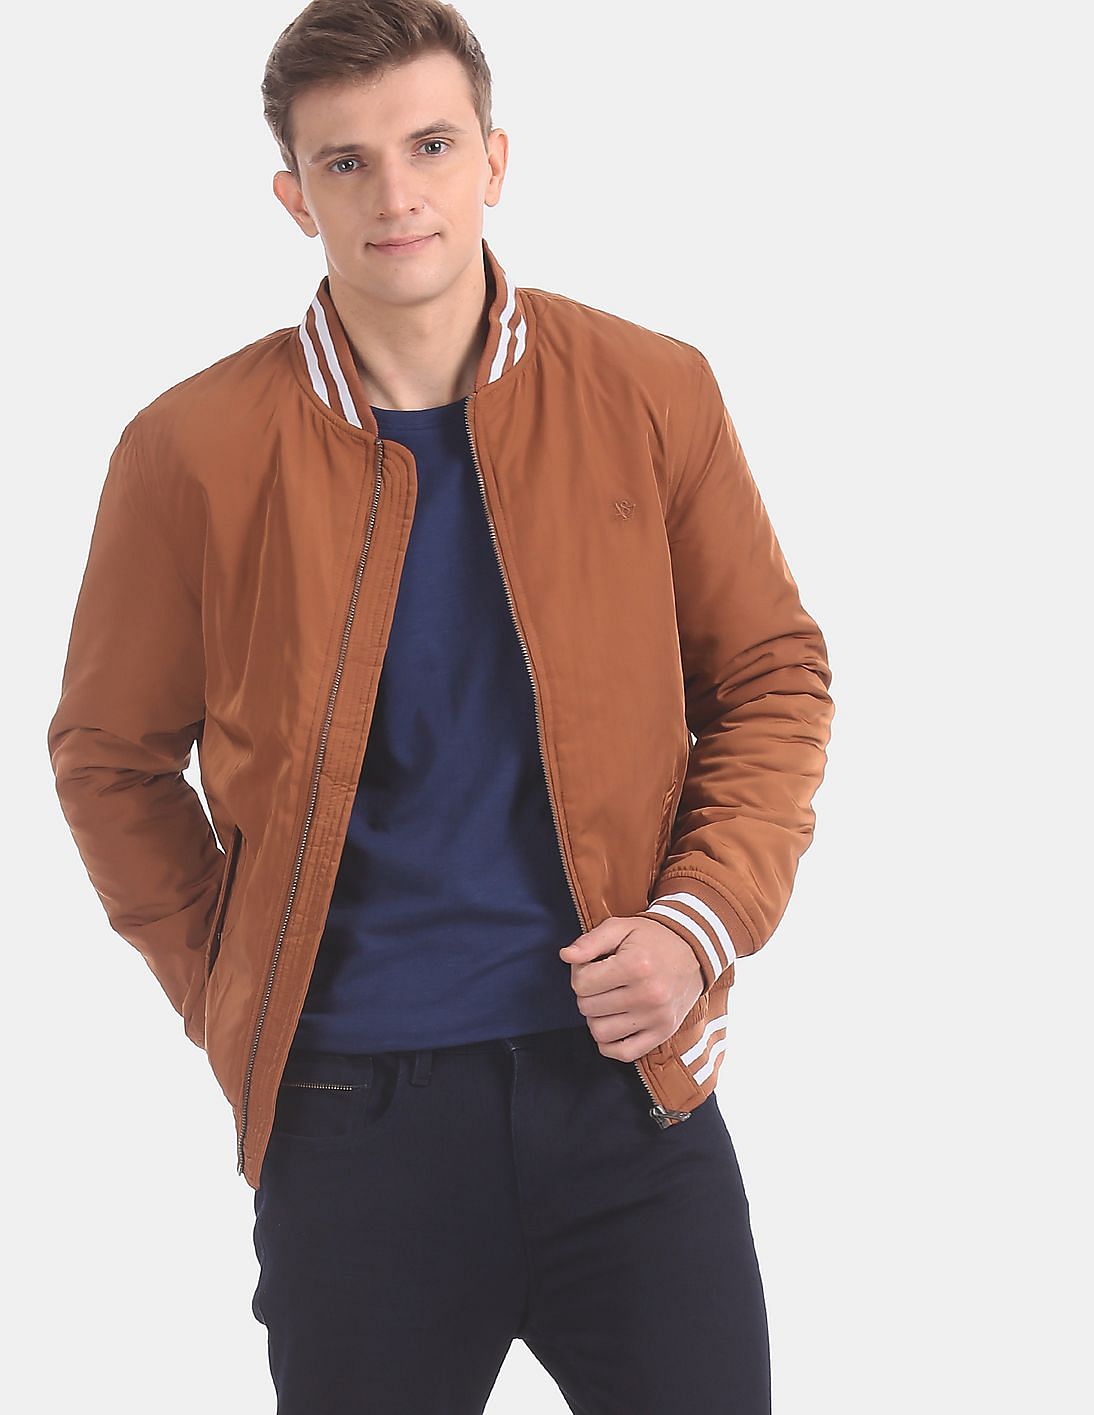 Buy Aeropostale Brown Solid Bomber Jacket - NNNOW.com